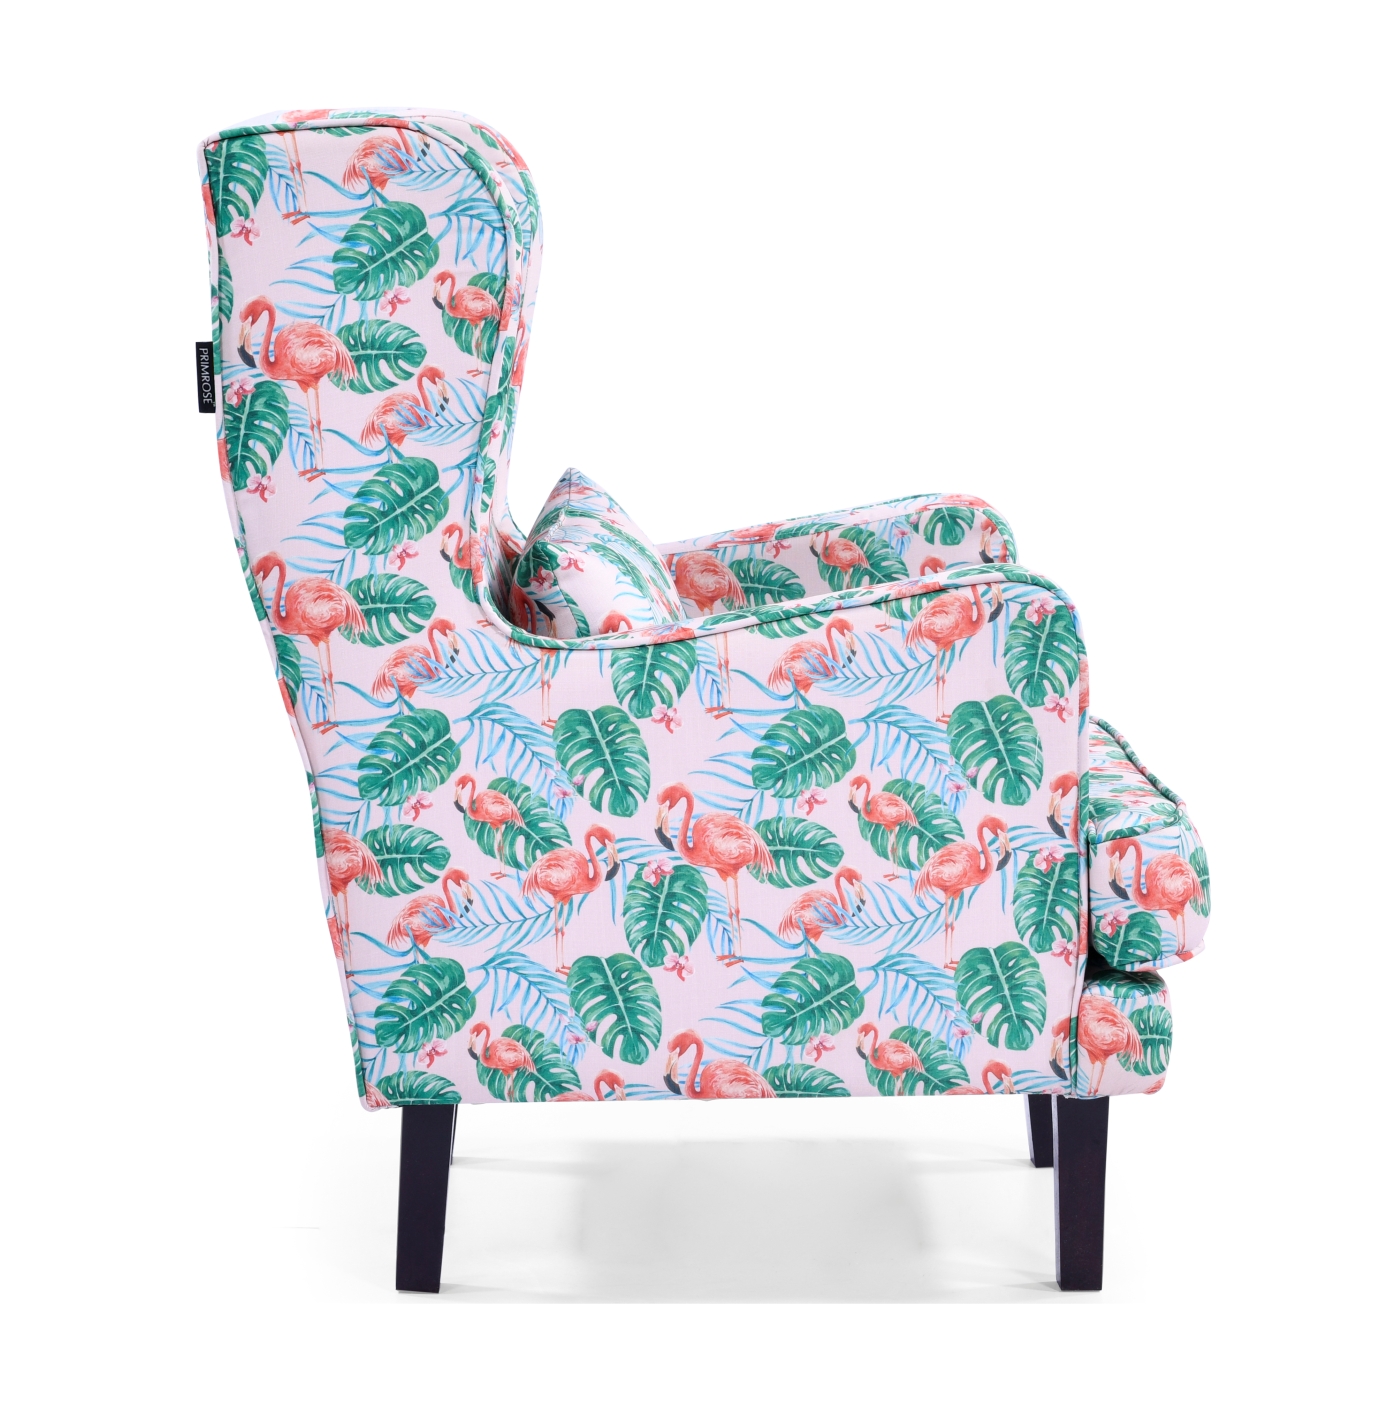 PRIMROSE Tropical Flamingo Digital Printed Faux Linen Fabric High Back Wing Chair - Red, Green  